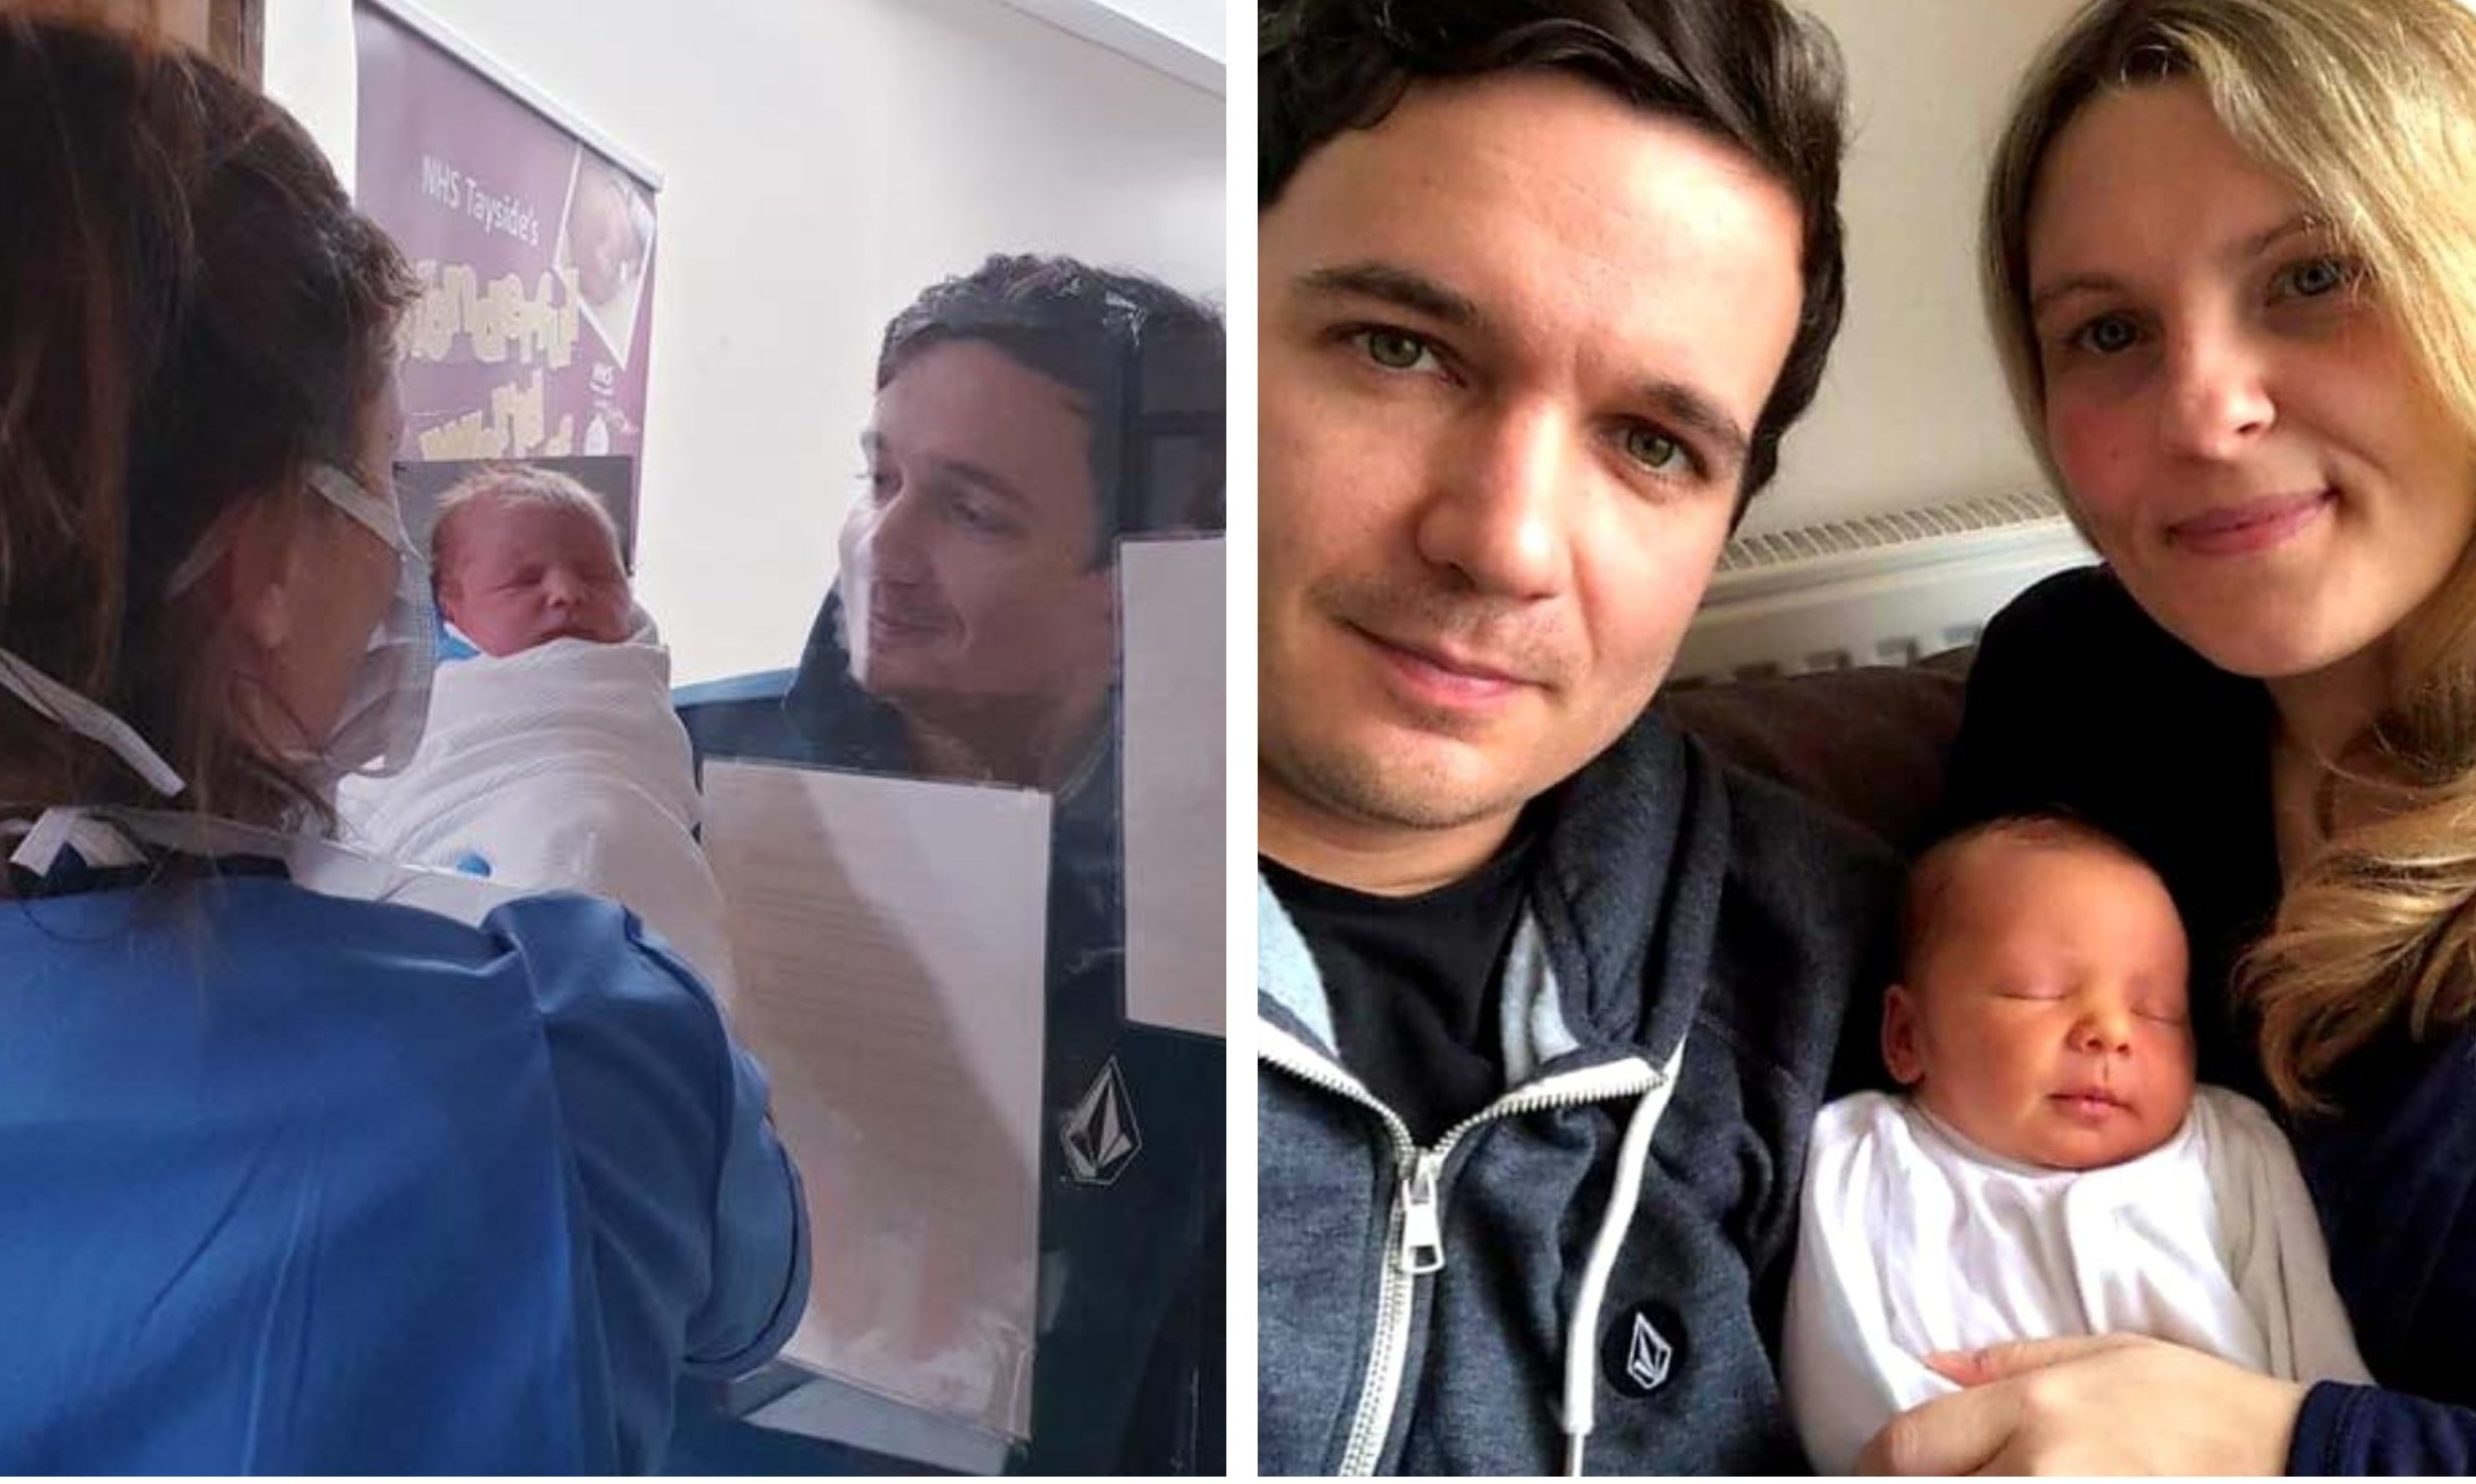 Right: Little Daisy at home with mum Victoria and dad Chris. Left: Father and daughter meet for the first time.